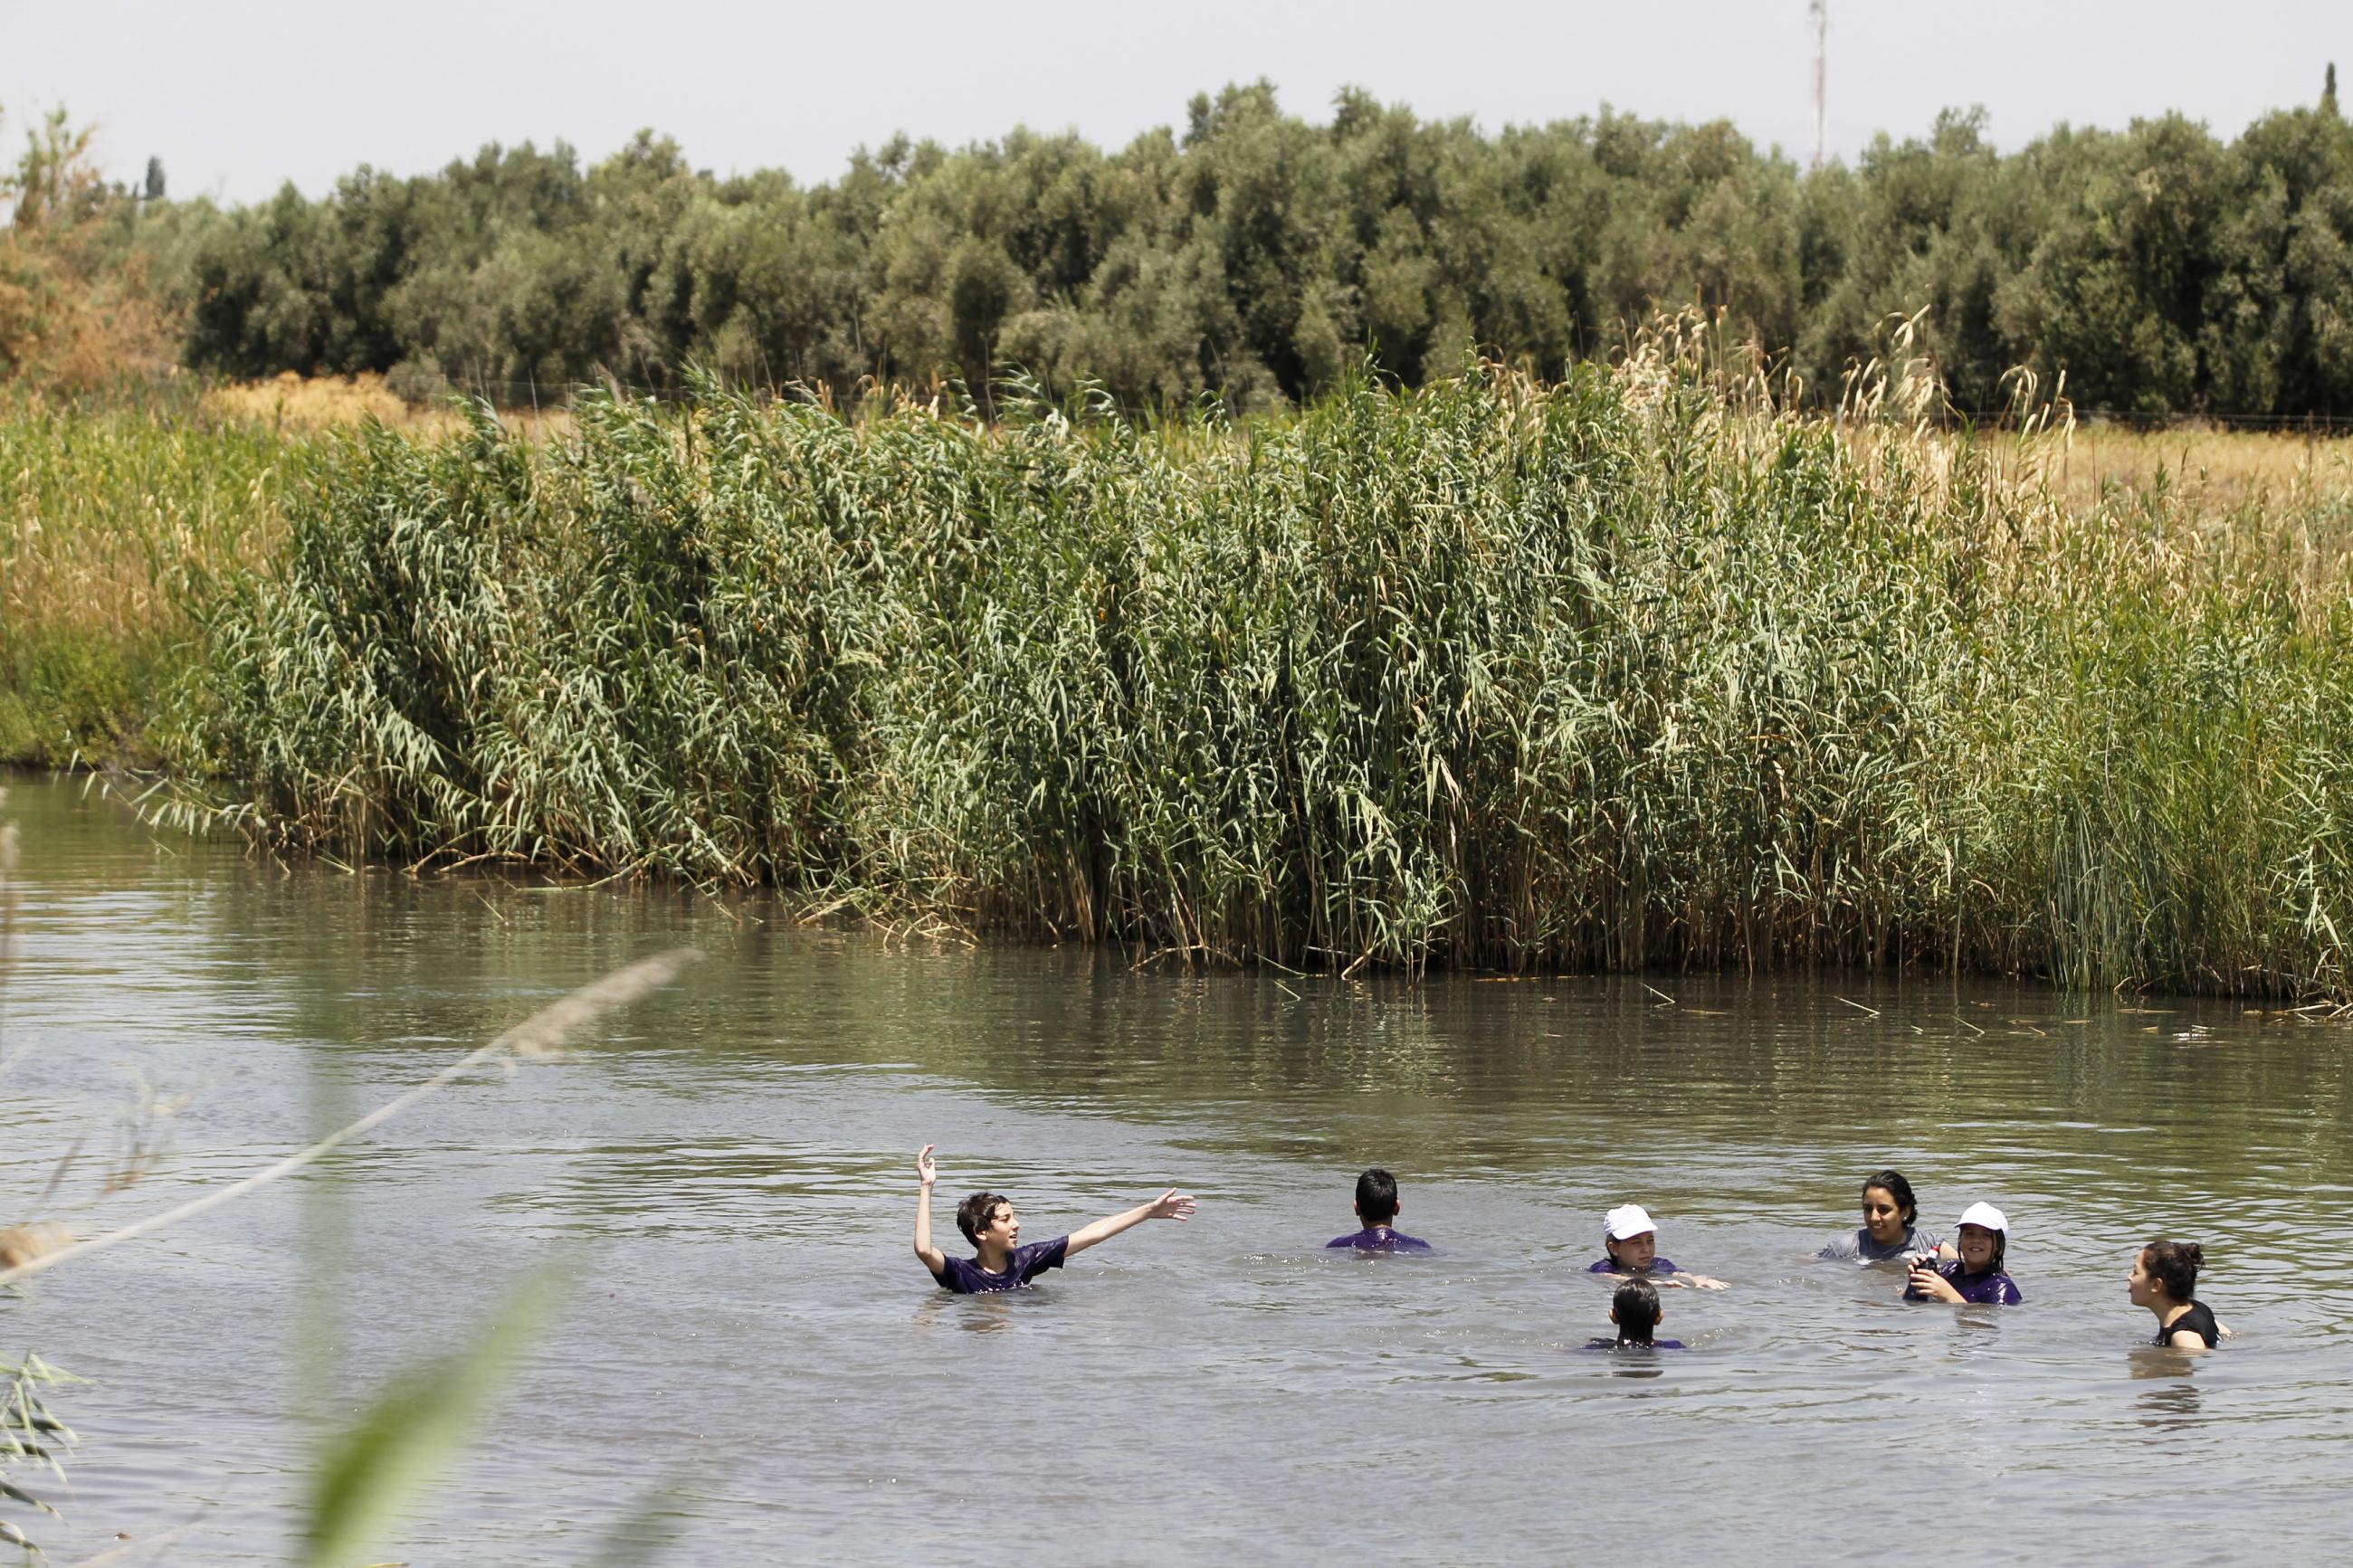 Youths bathe in a stream at the Valley of Springs near the Jordan River July 16, 2012. The Biblical river, which has inspired countless spirituals and folk songs, is just a narrow stream in many parts - polluted and stagnant. But that's about to change. Thanks to desalination and wastewater recycling, there is more fresh water to go around and the Jordan will slowly be returned to its former glory. 